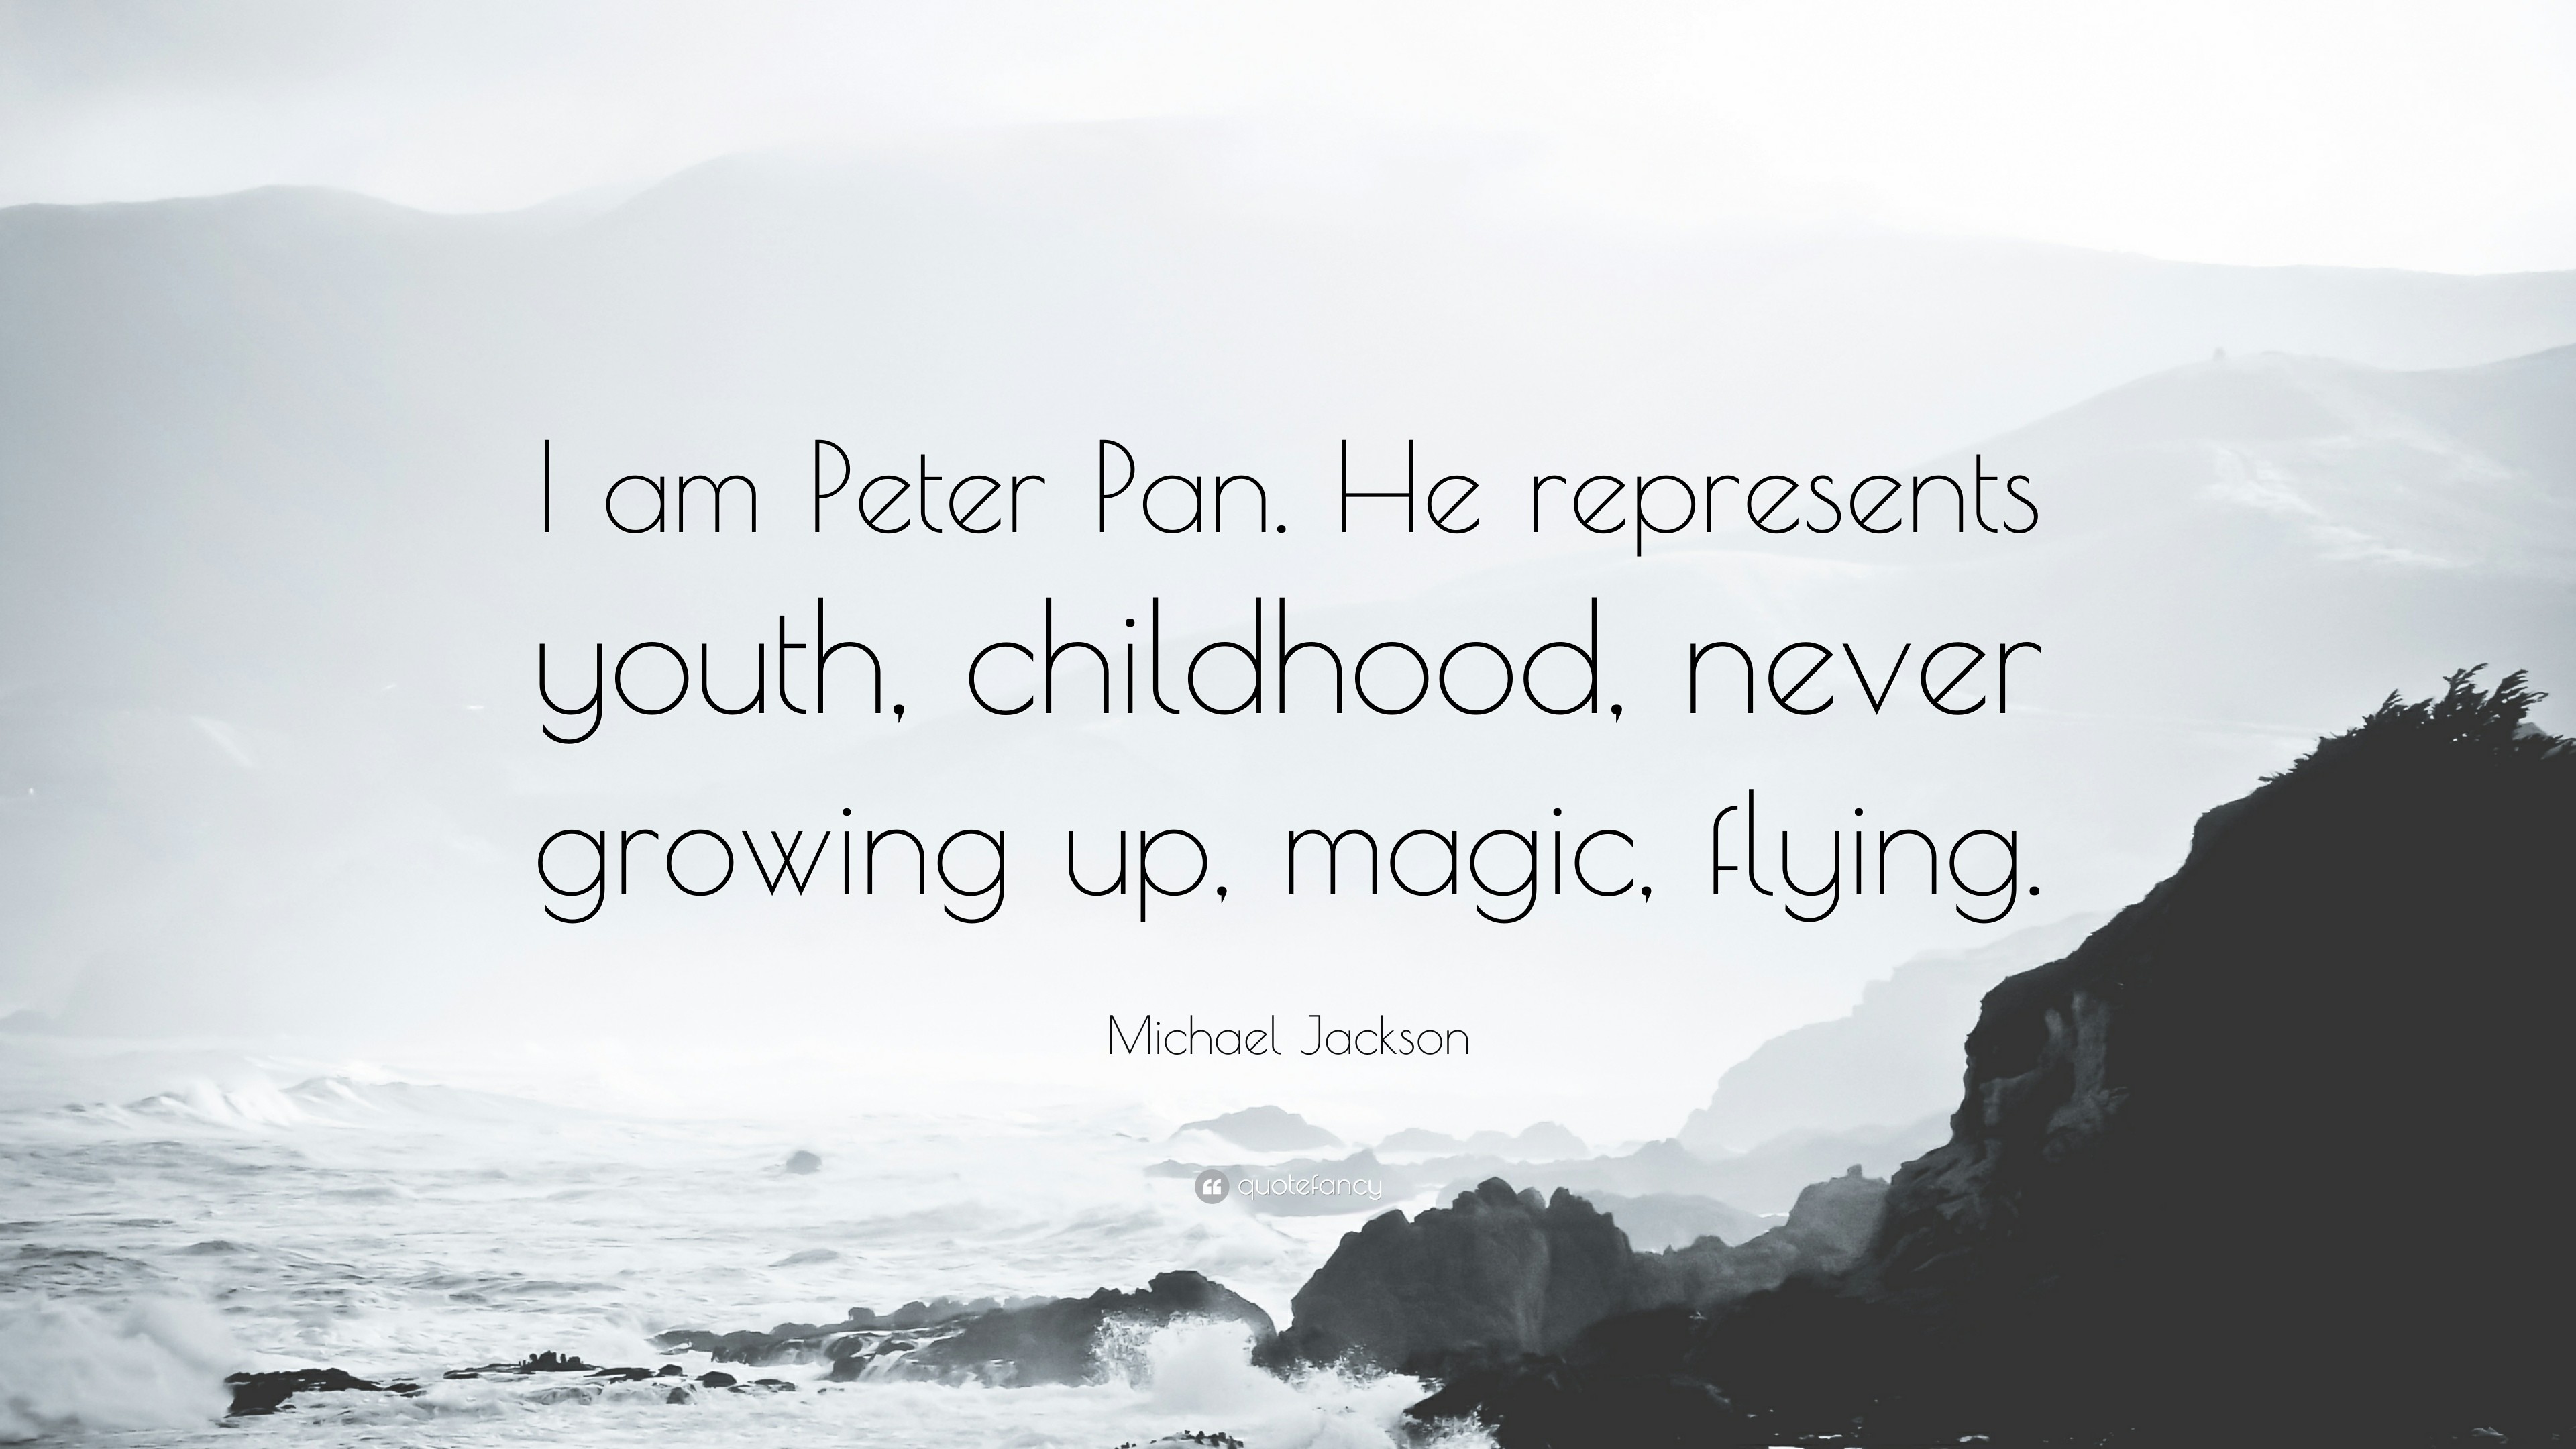 3840x2160 Michael Jackson Quote: “I am Peter Pan. He represents youth, childhood,